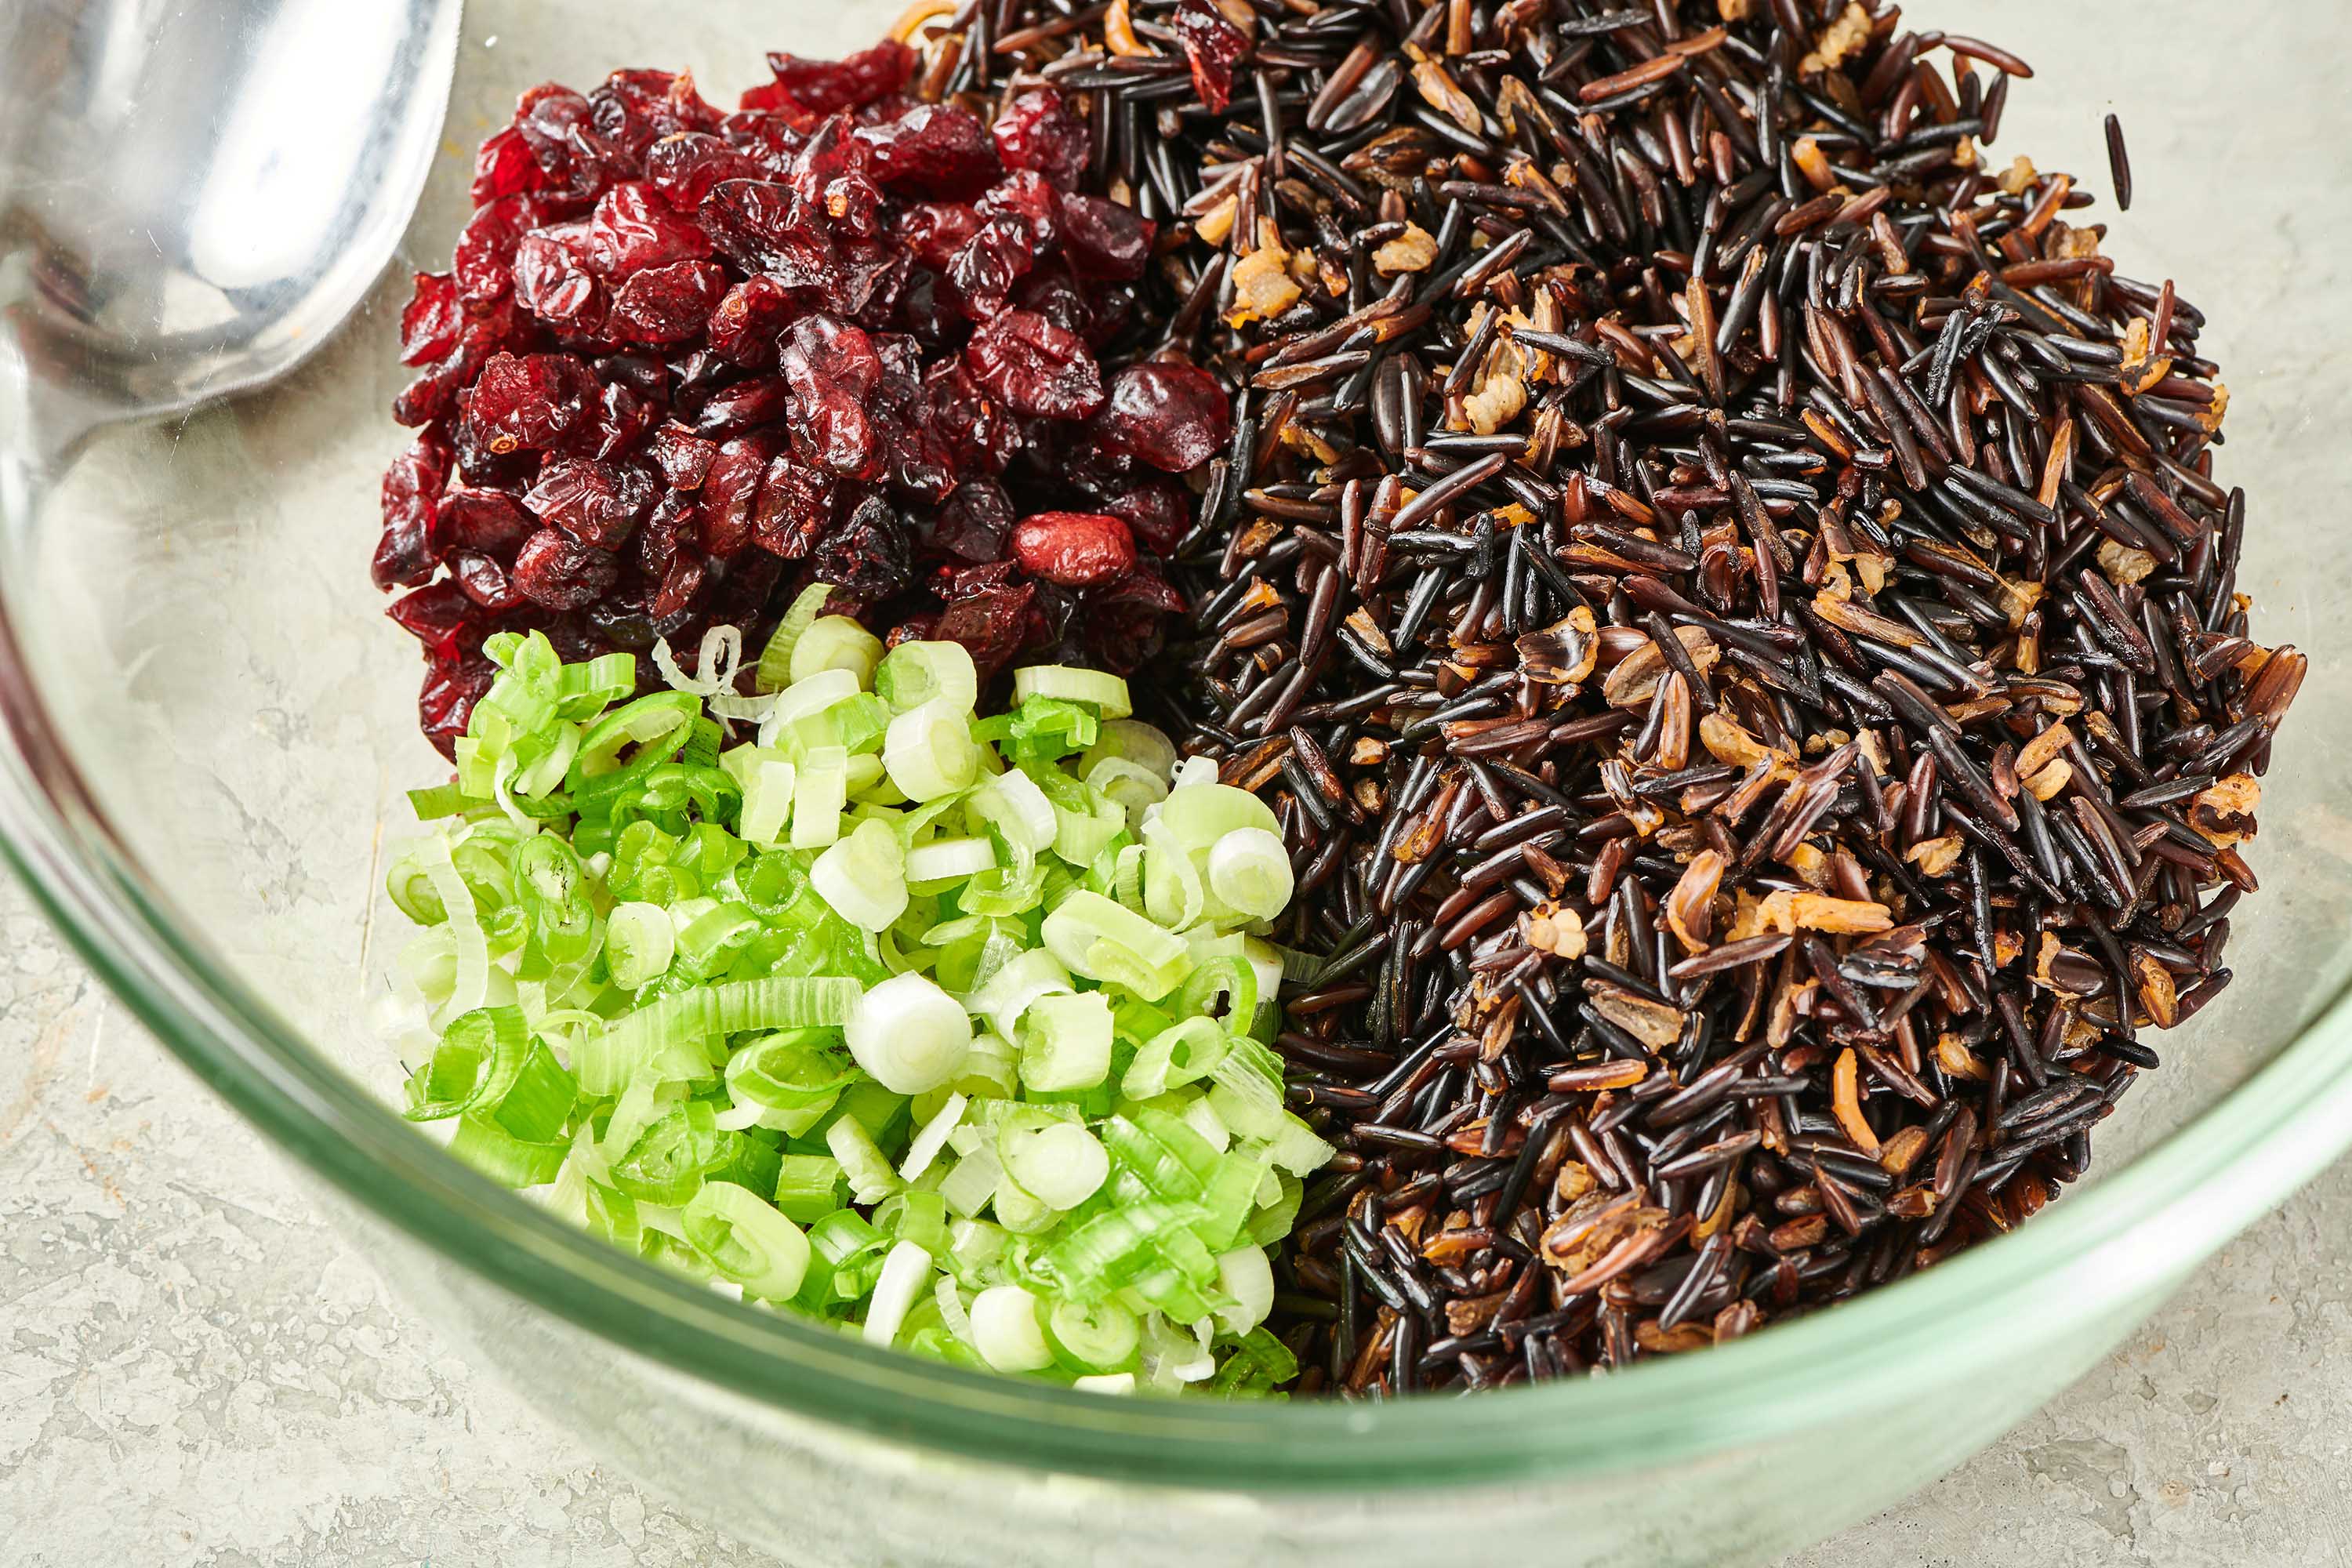 Wild rice, scallions, and dried cranberries unmixed in a bowl.